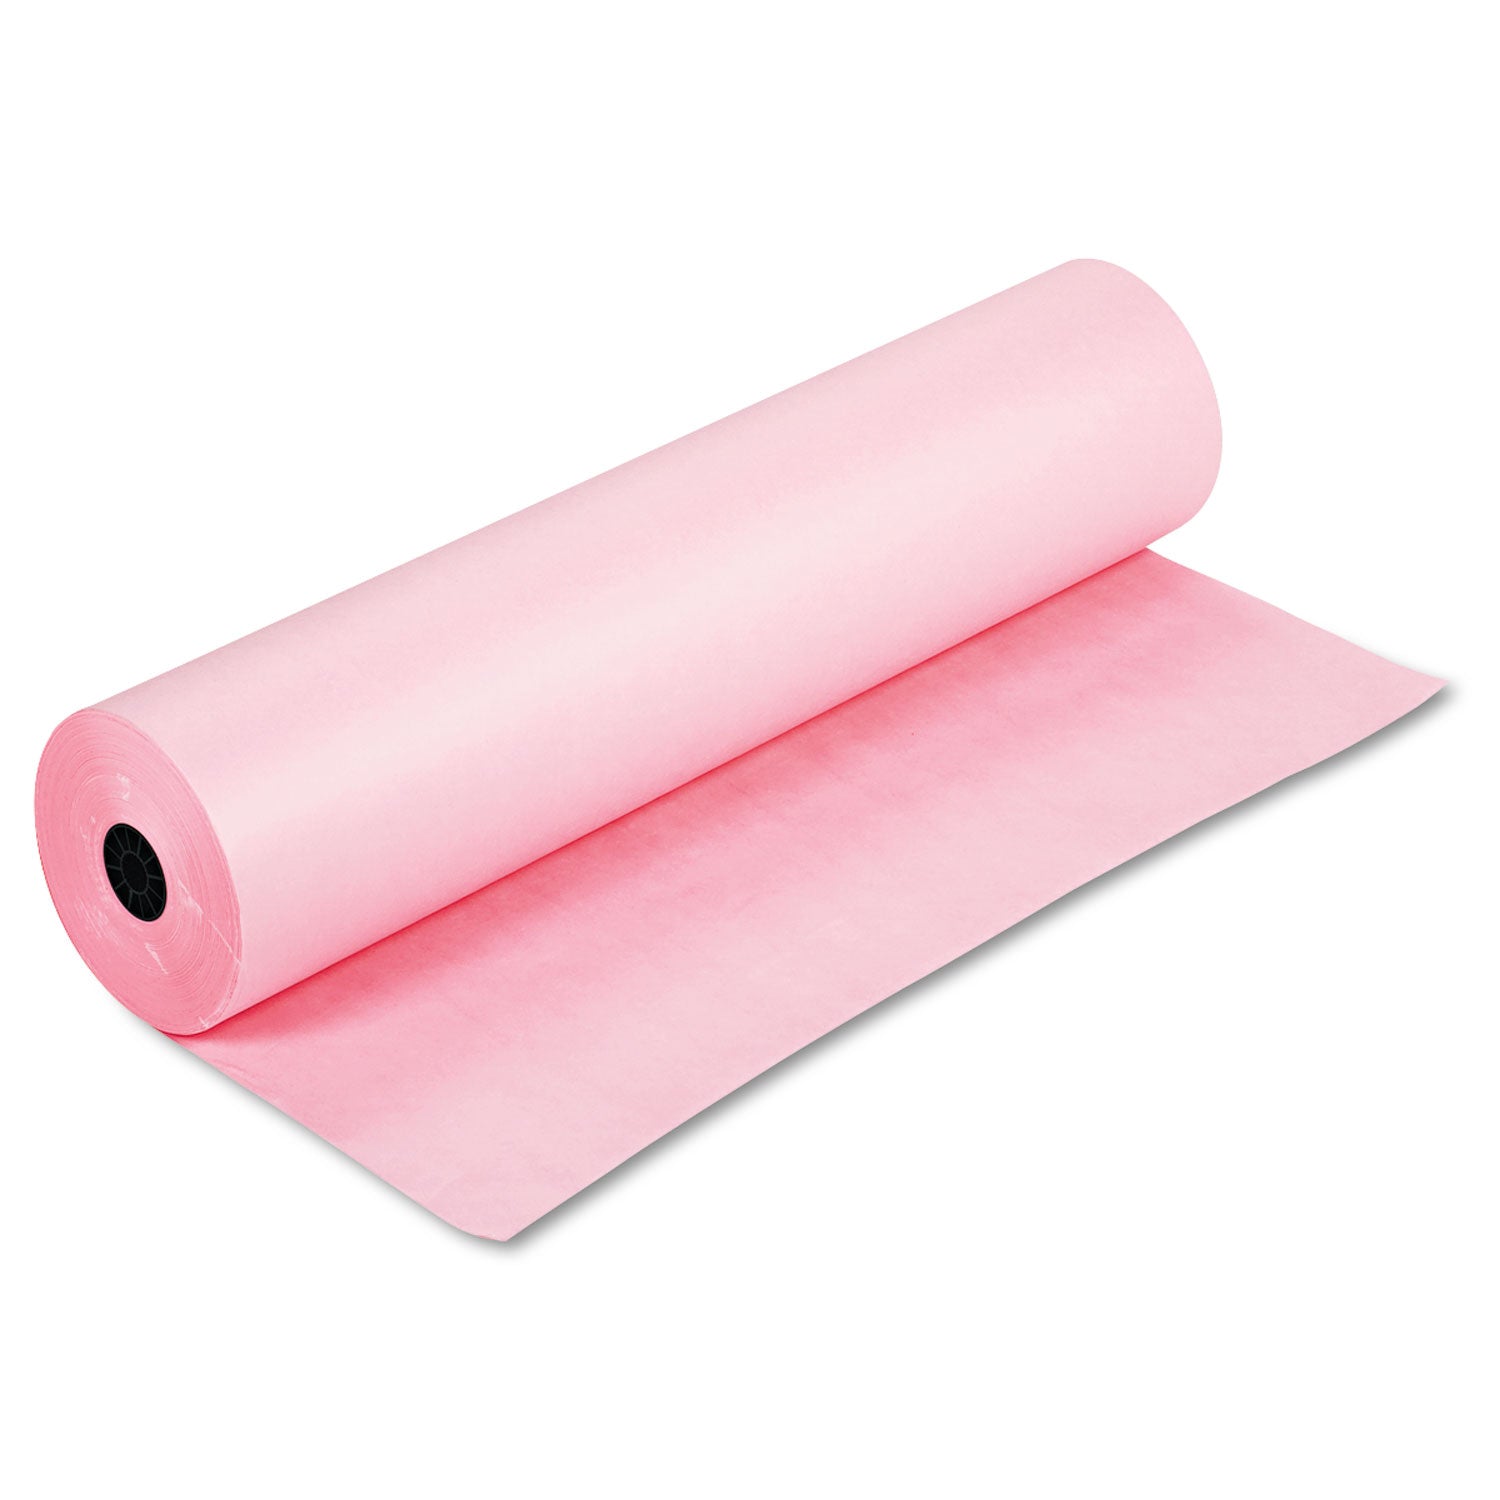 spectra-artkraft-duo-finish-paper-48-lb-text-weight-36-x-1000-ft-pink_pac67261 - 1